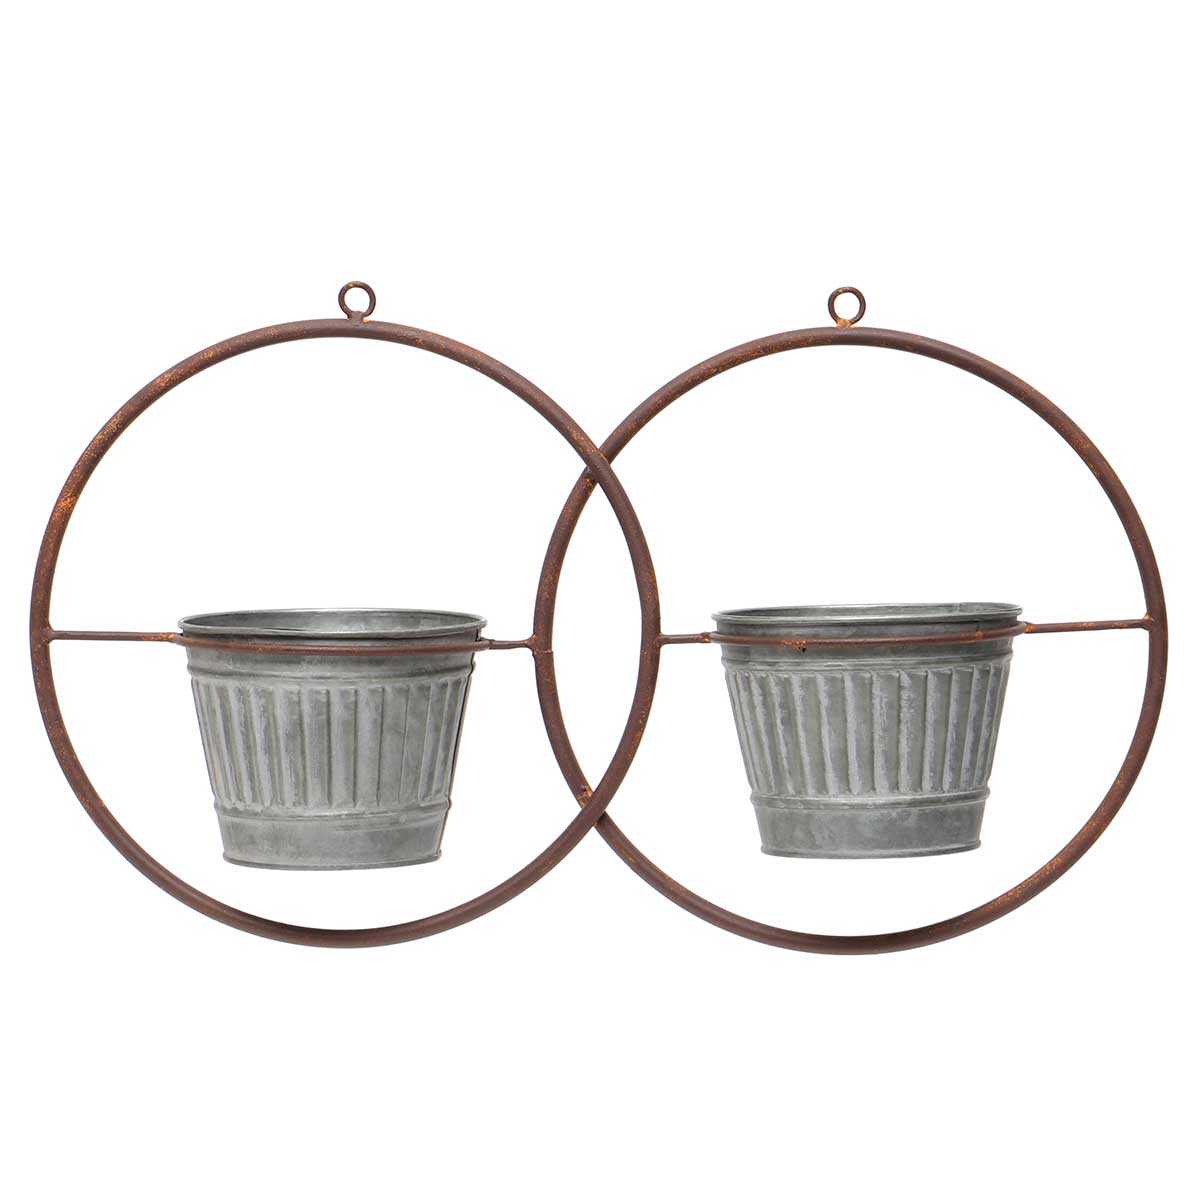 IN BLOOM METAL HANGING DOUBLE CIRCLE PLANTER WITH 2 METAL